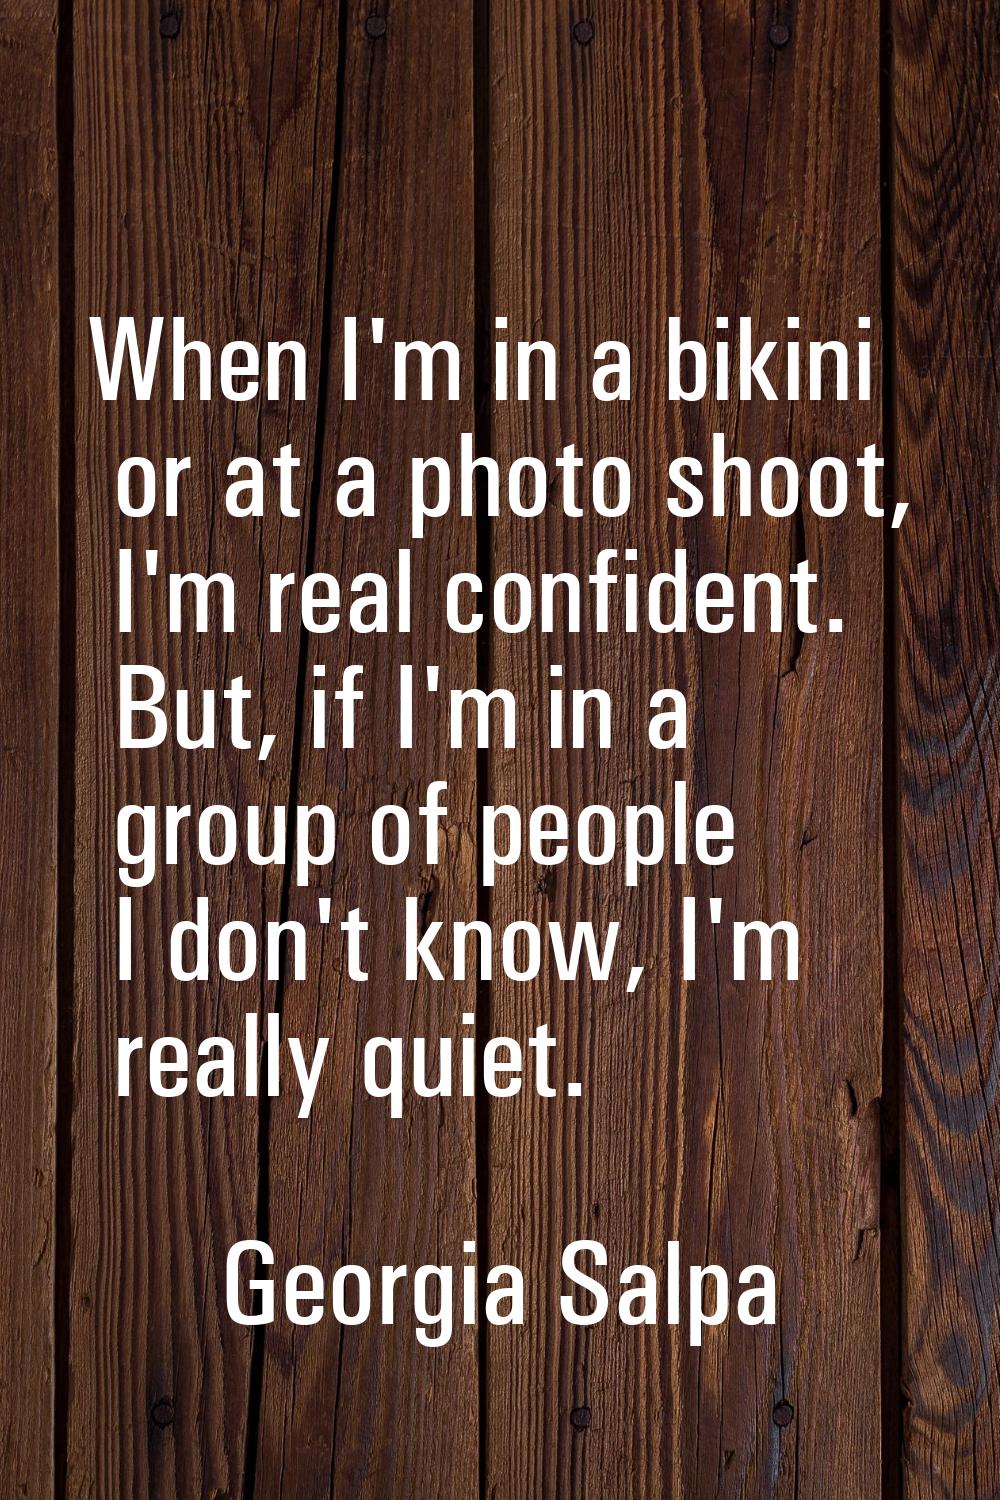 When I'm in a bikini or at a photo shoot, I'm real confident. But, if I'm in a group of people I do